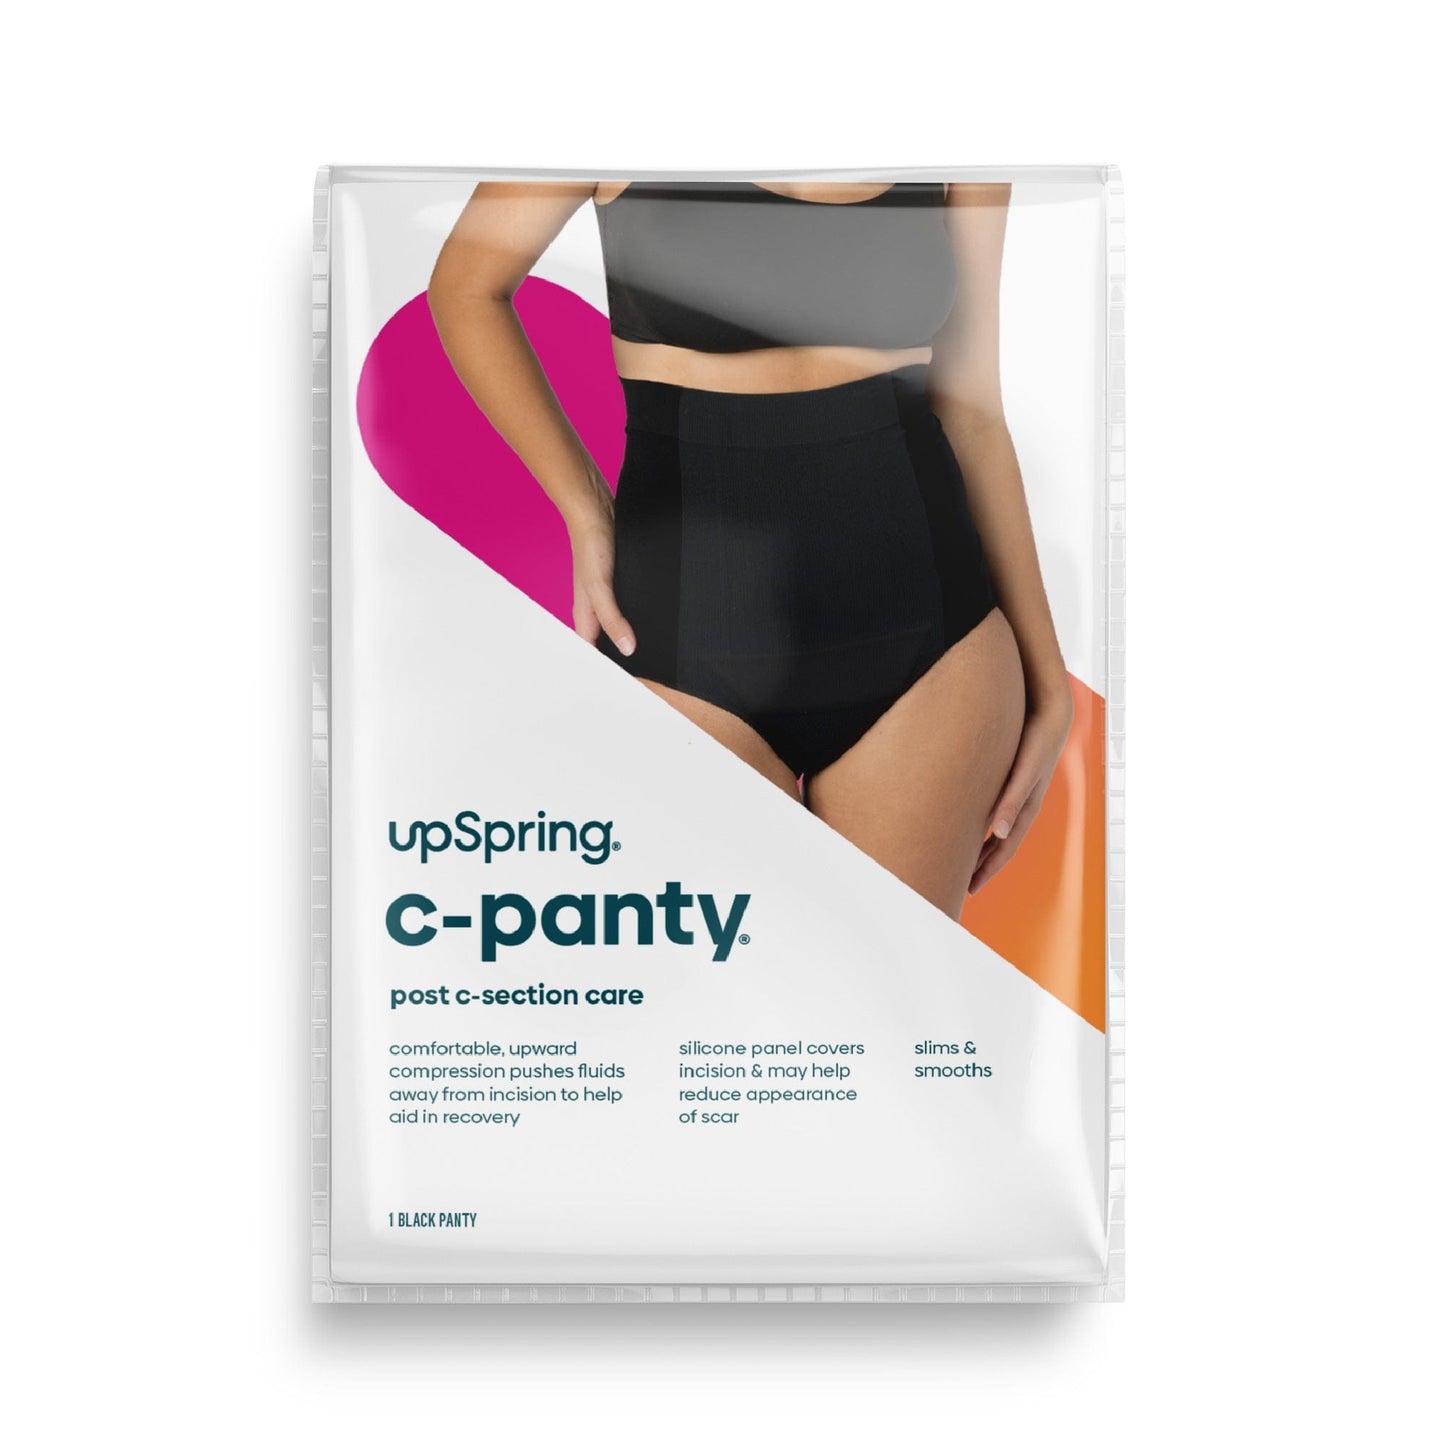 Just had a C-section? Try our C-Panty with comfortable, upward